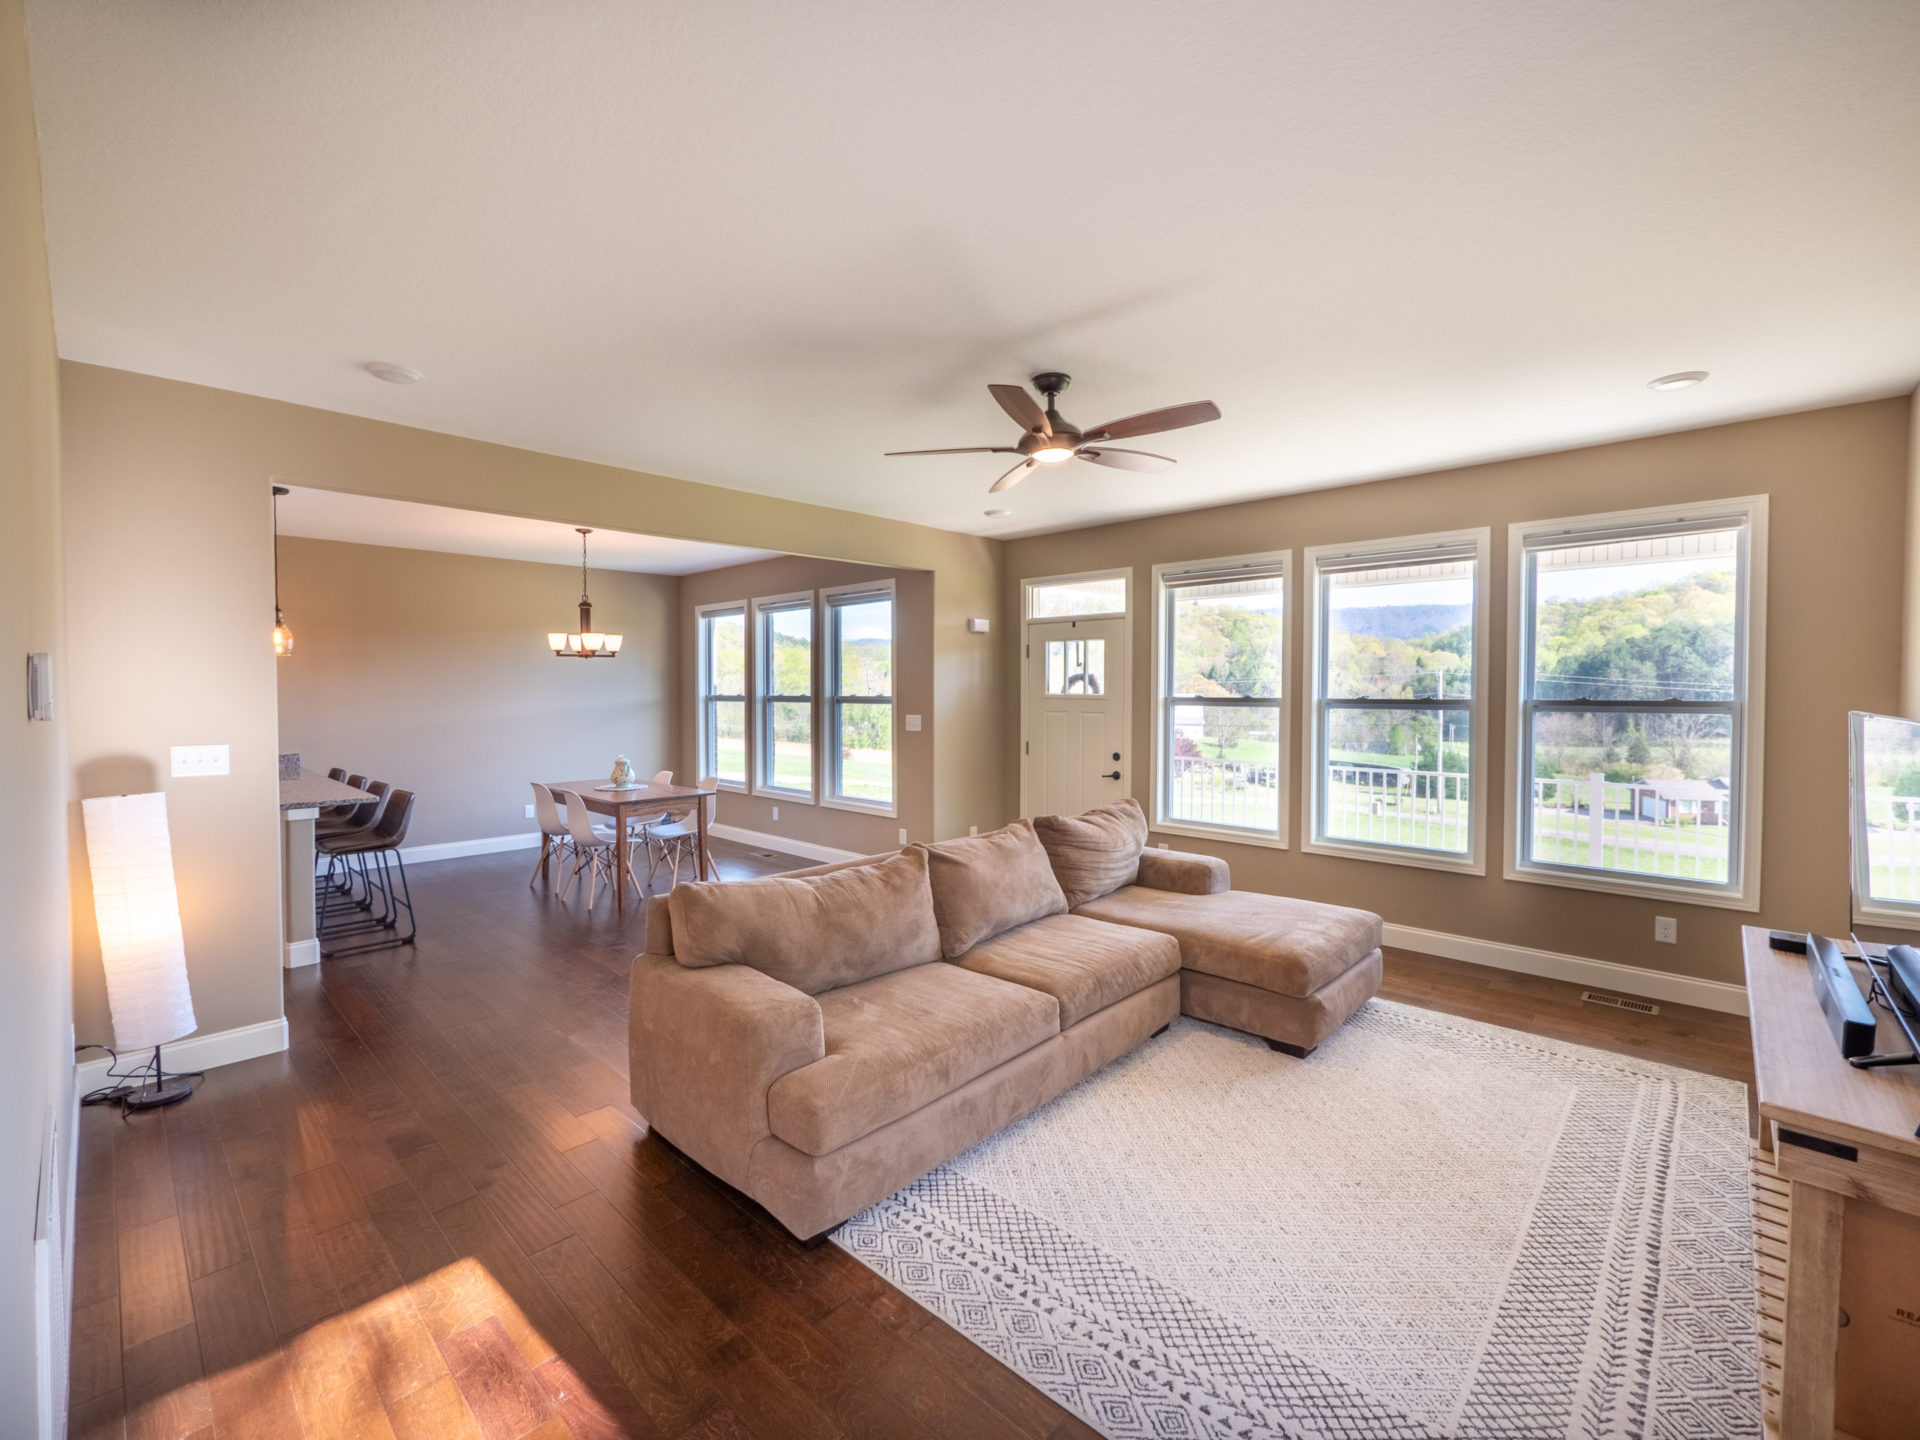 Real Estate Photography of Interior Living room